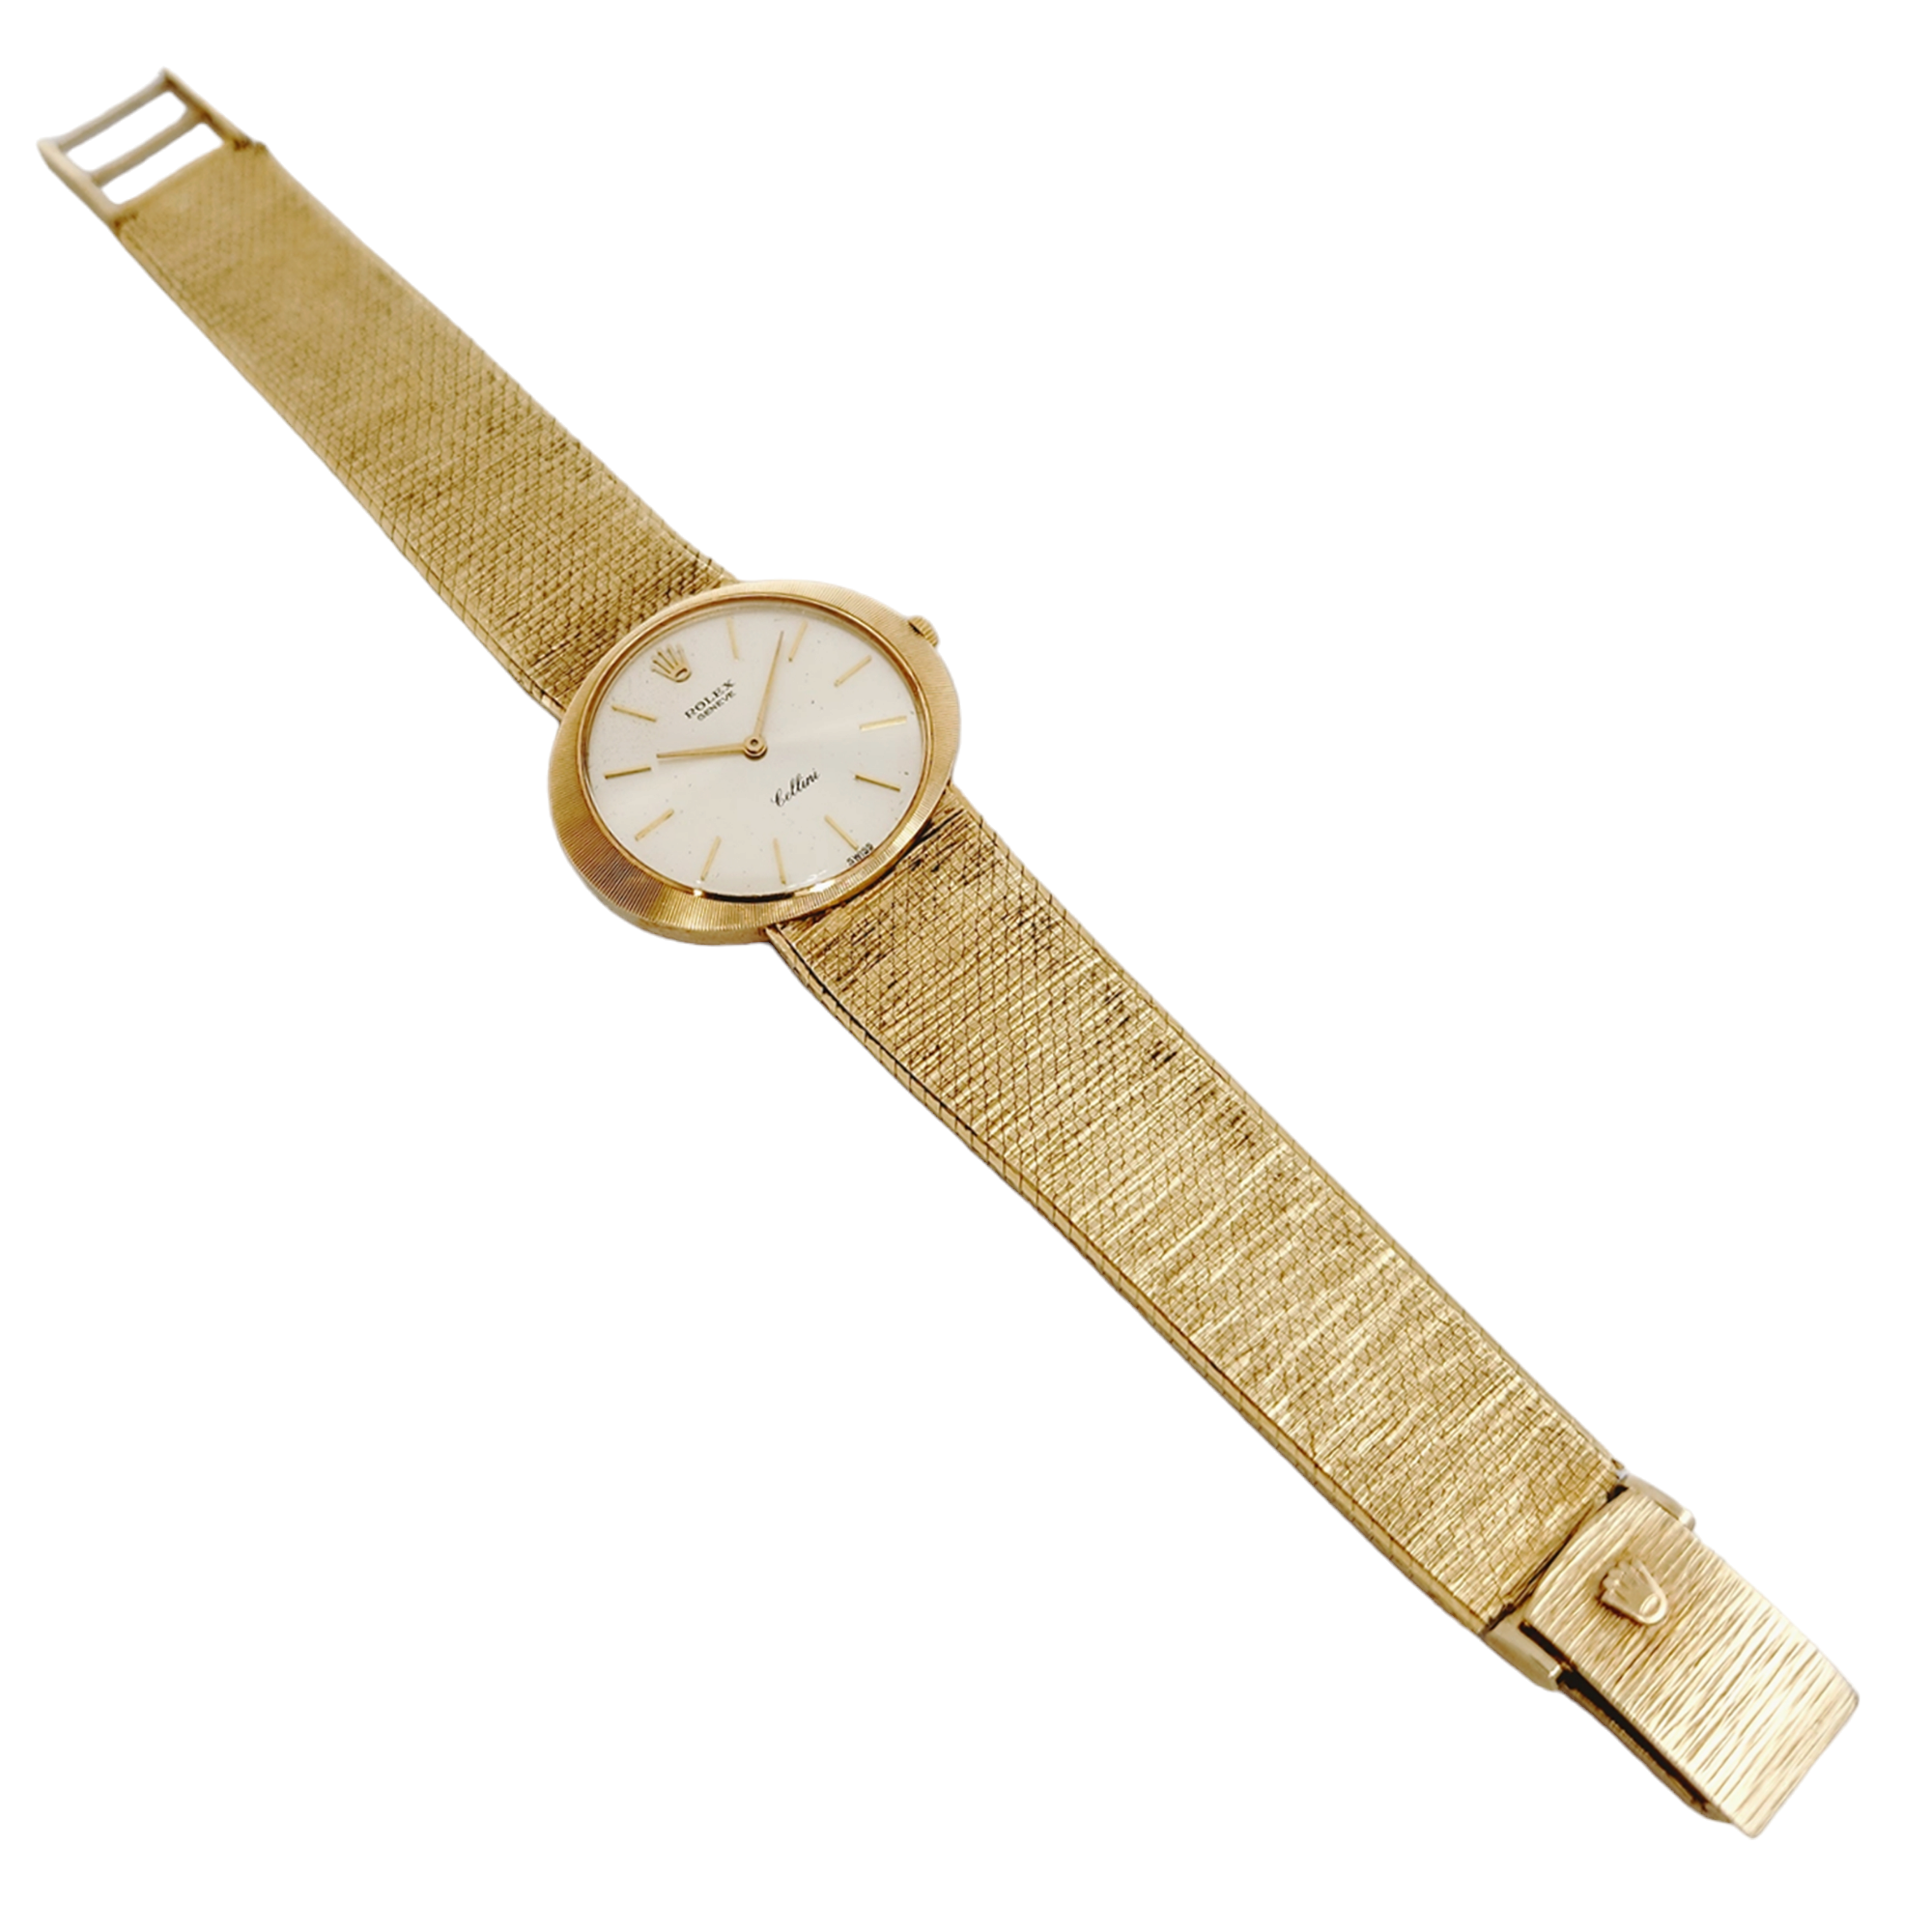 Rolex Cellini Vintage 14K Yellow Gold Wristwatch w/ Light Champagne Dial & Smooth Bezel. (Pre-Owned)